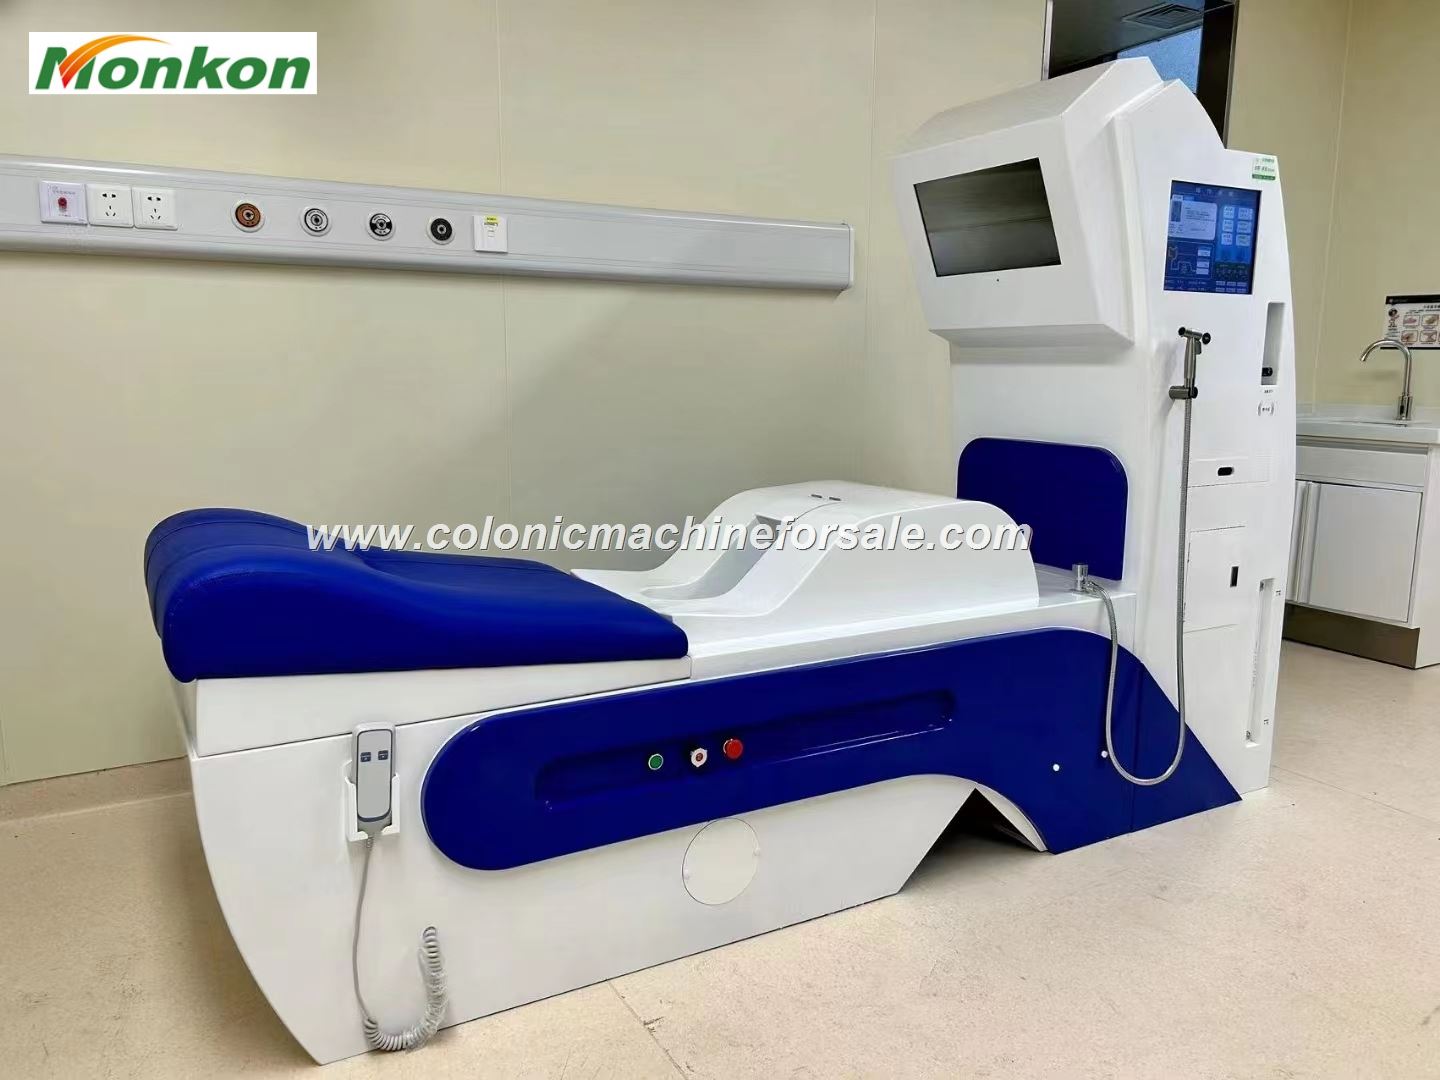 Libbe Colonic Machine for Sale in FW, TX